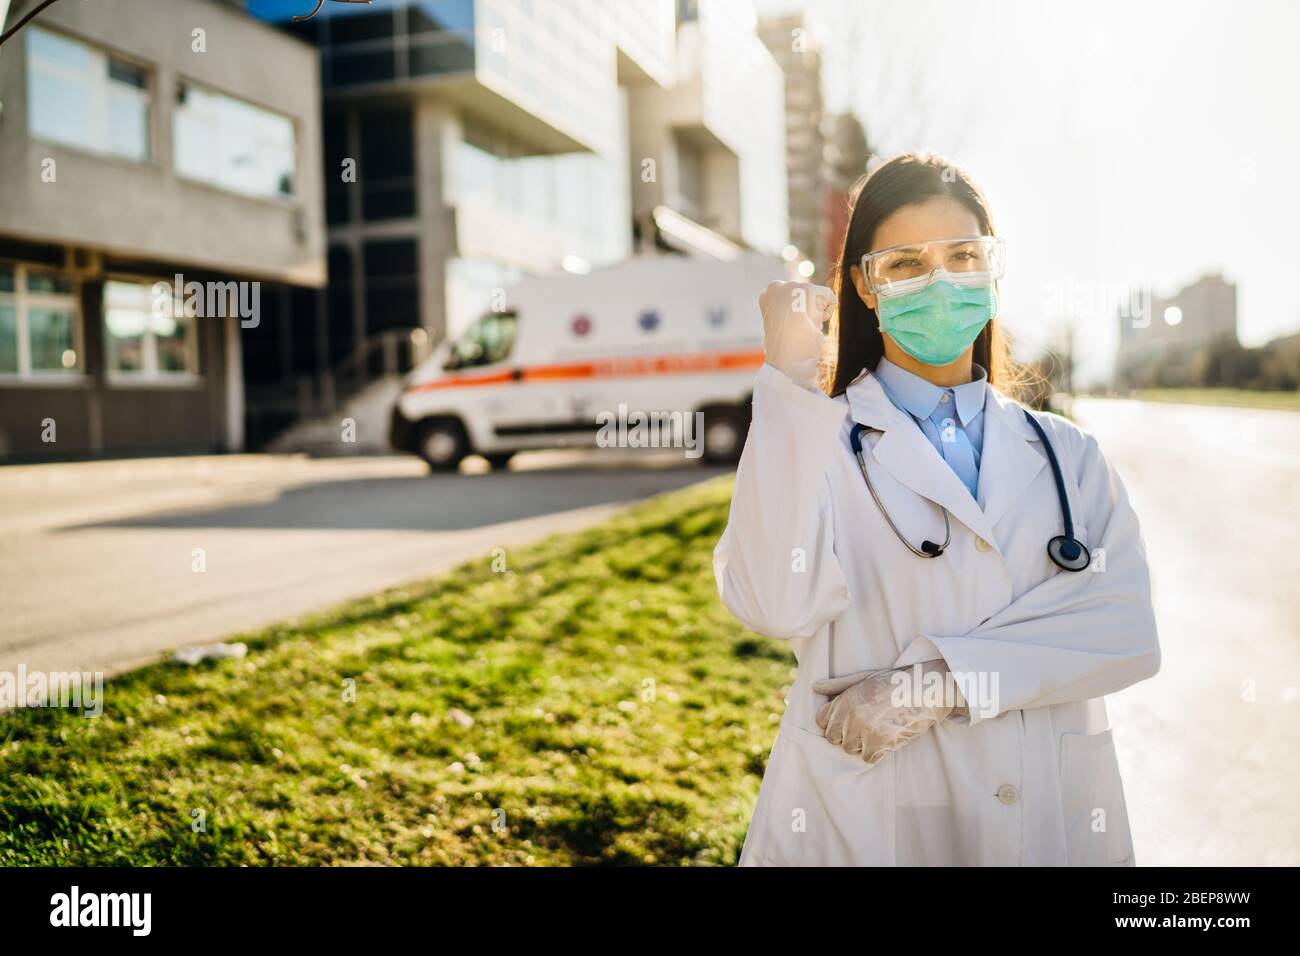 Brave optimistic paramedic in the front lines,working in a isolation hospital facility with infected patients.Covid-19 emergency room triage doctor wi Stock Photo